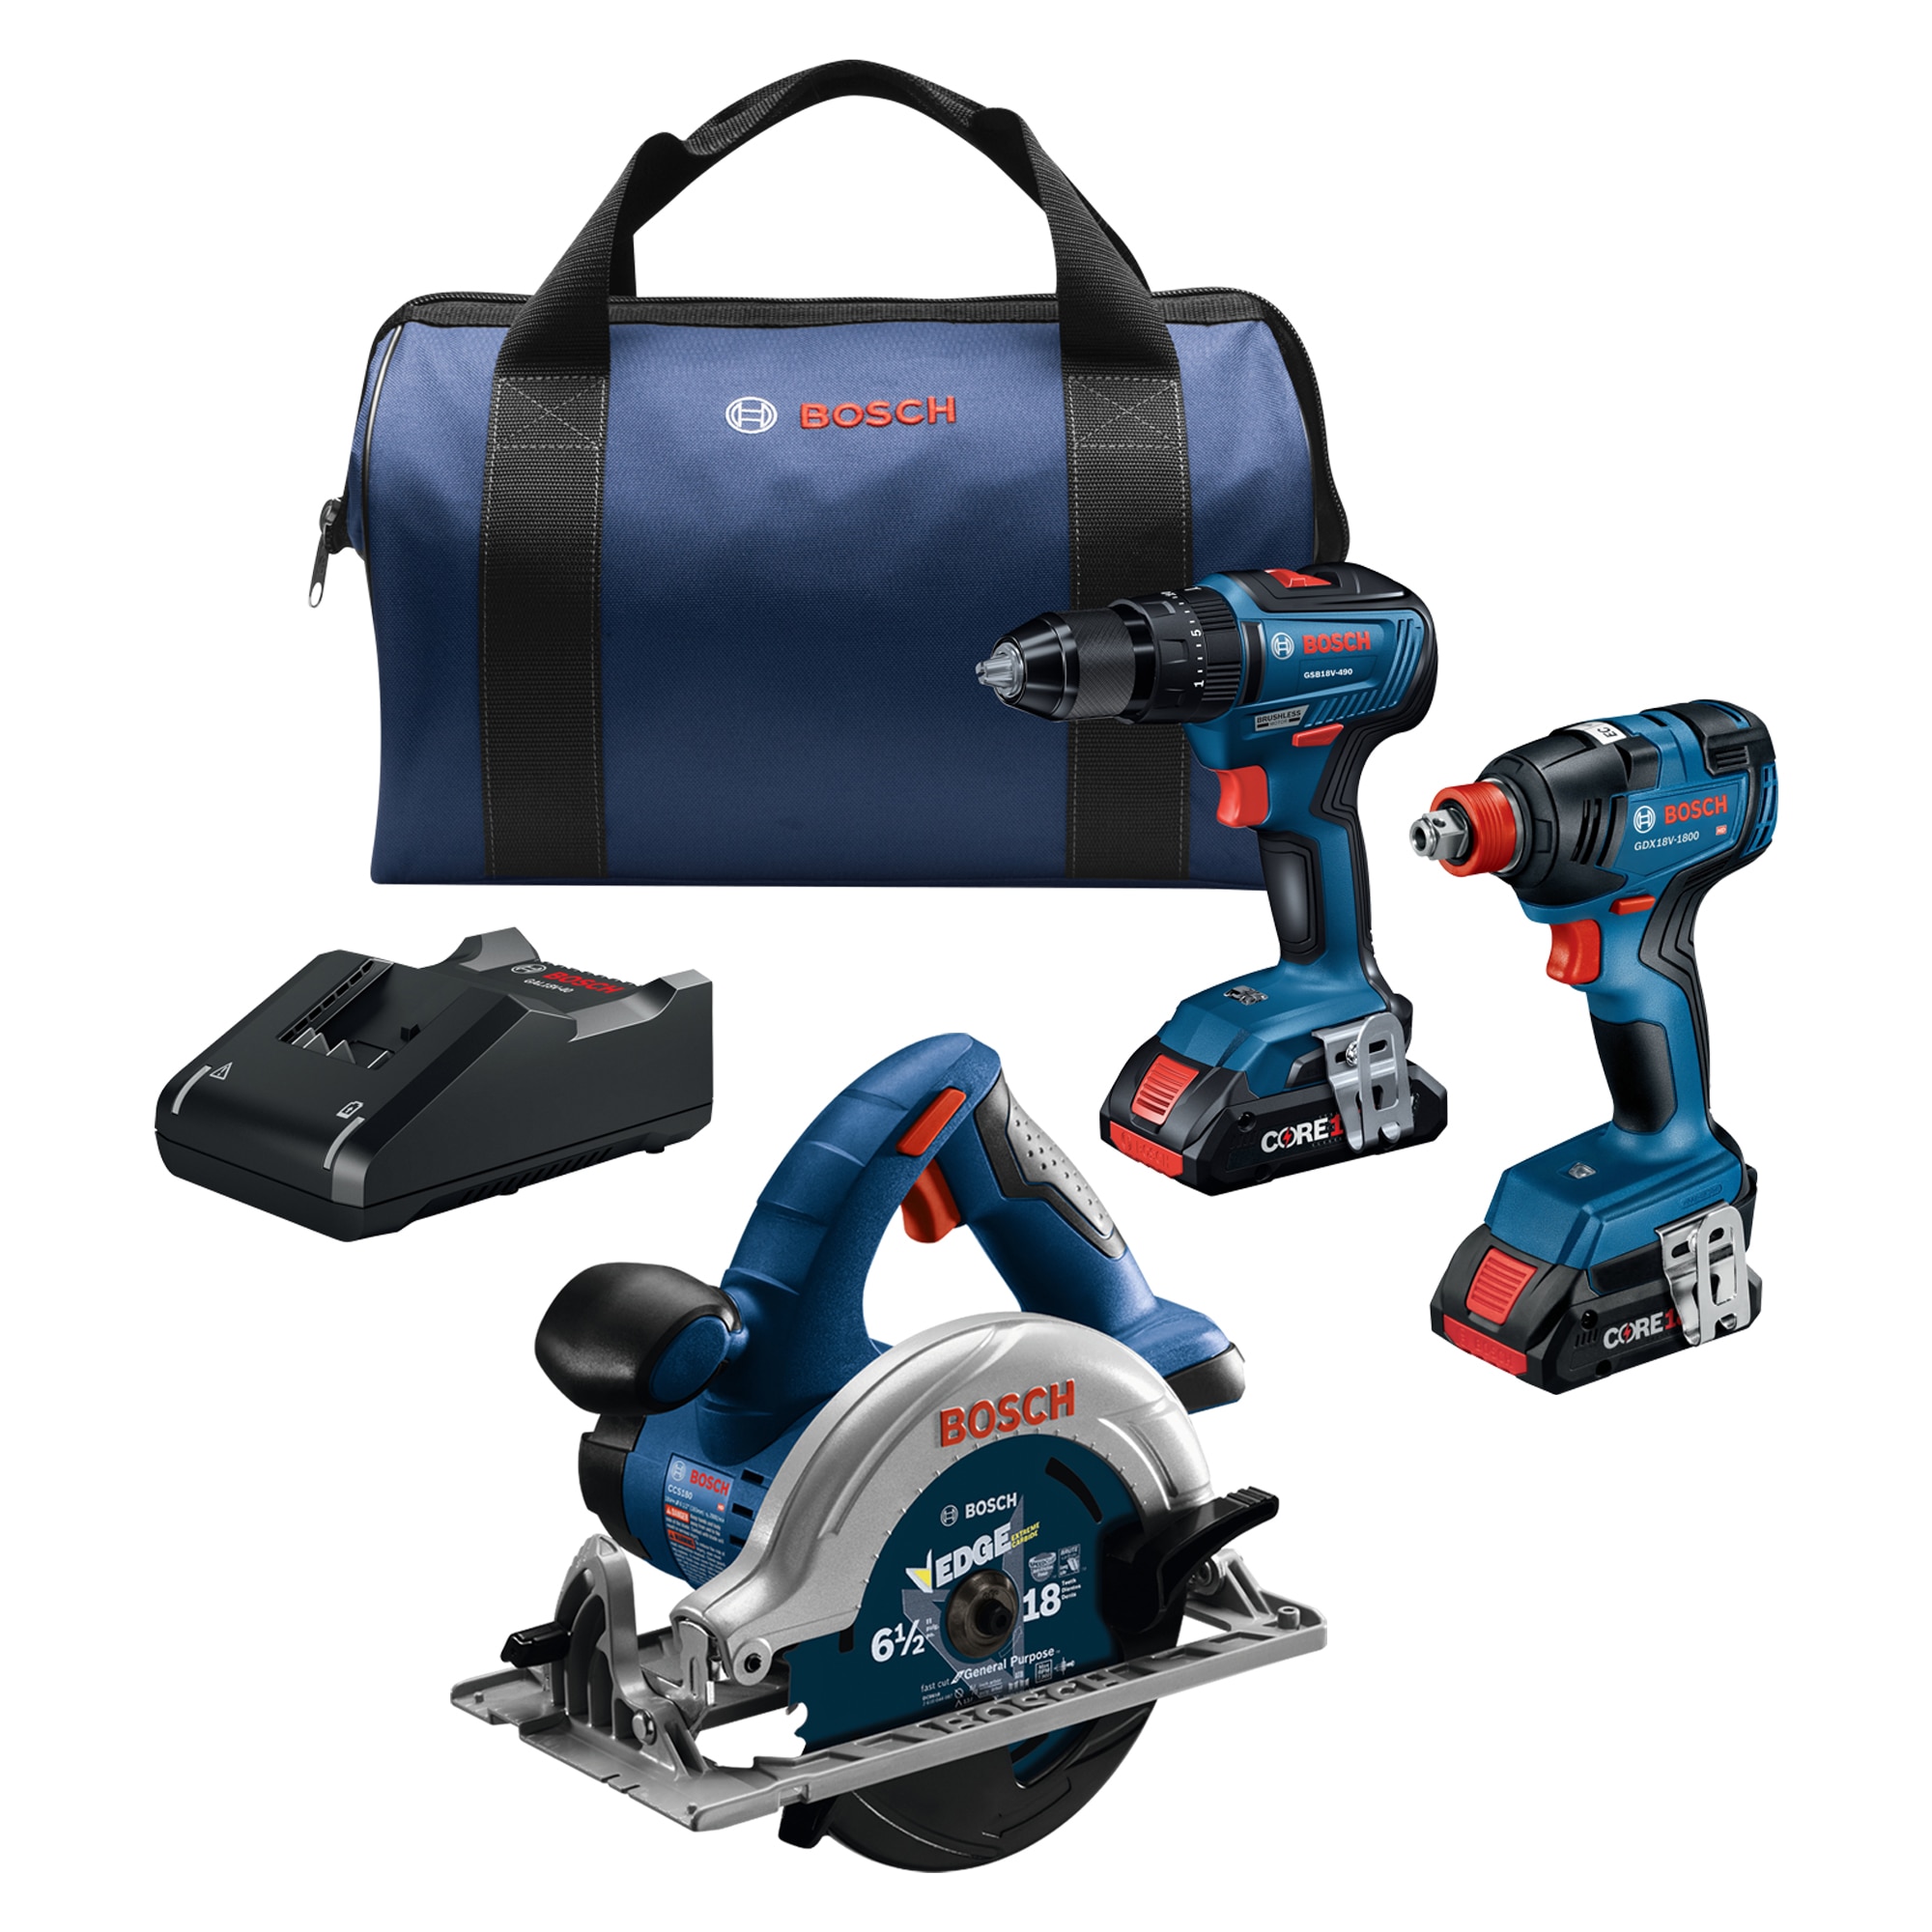 Bosch 18V Brushless 3-Tool Kit w/ Compact Drill/Impact Driver/ Circular Saw with 2x4.0ah Batteries, Charger and Bag